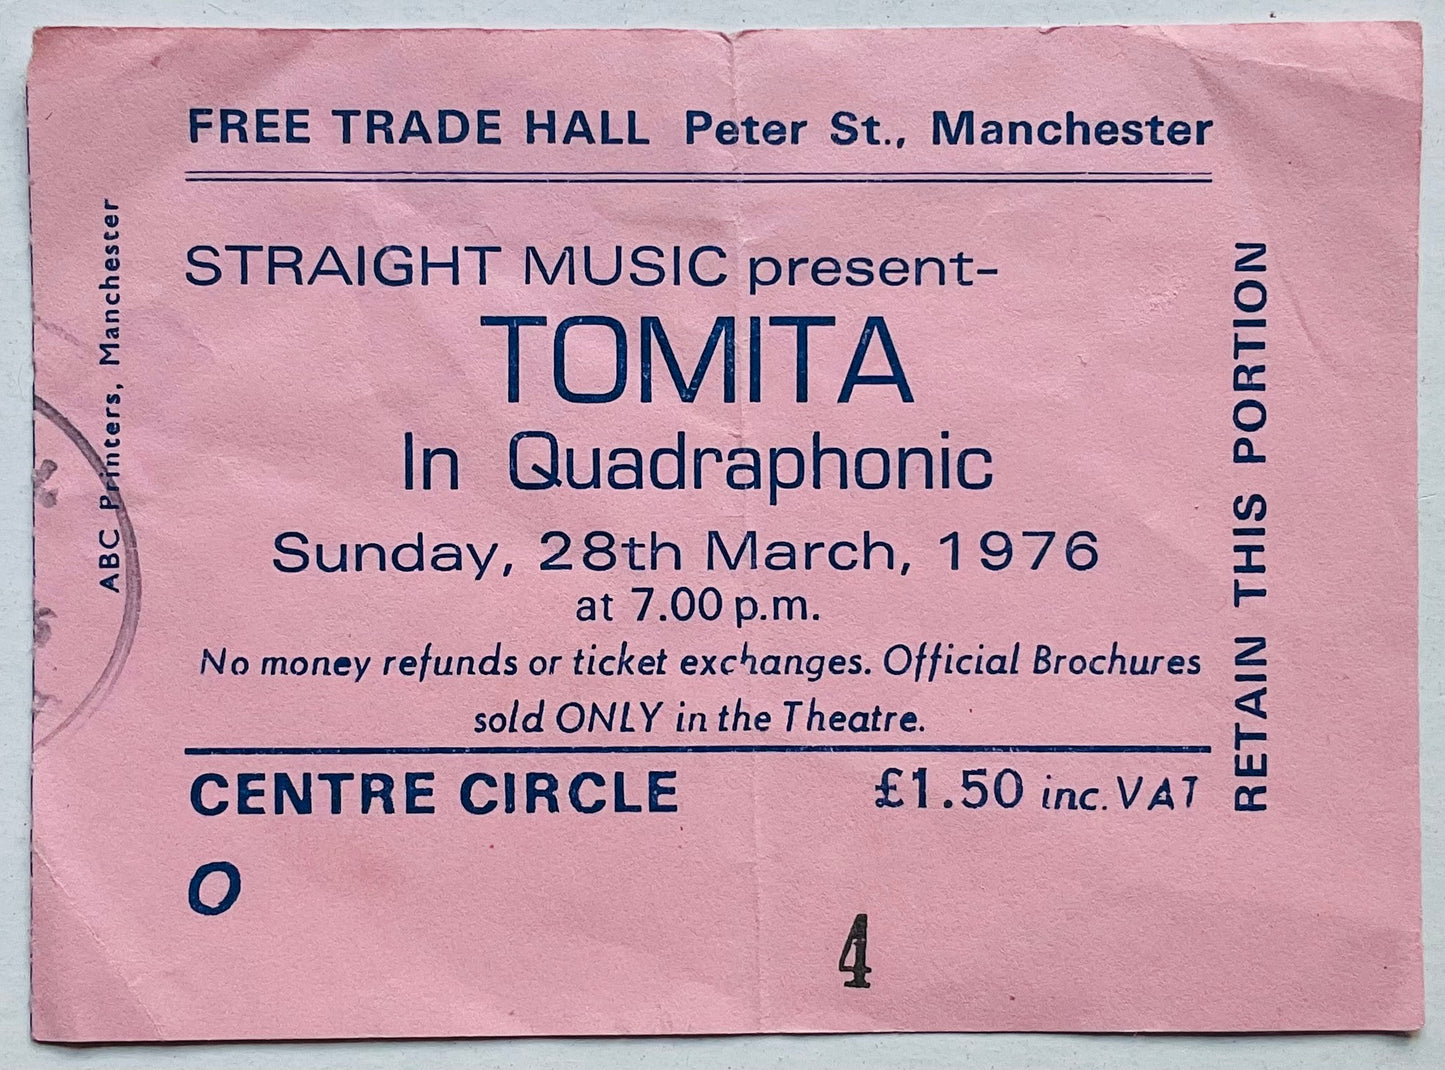 Isao Tomita Original Used Concert Ticket Free Trade Hall Manchester 28th Mar 1976